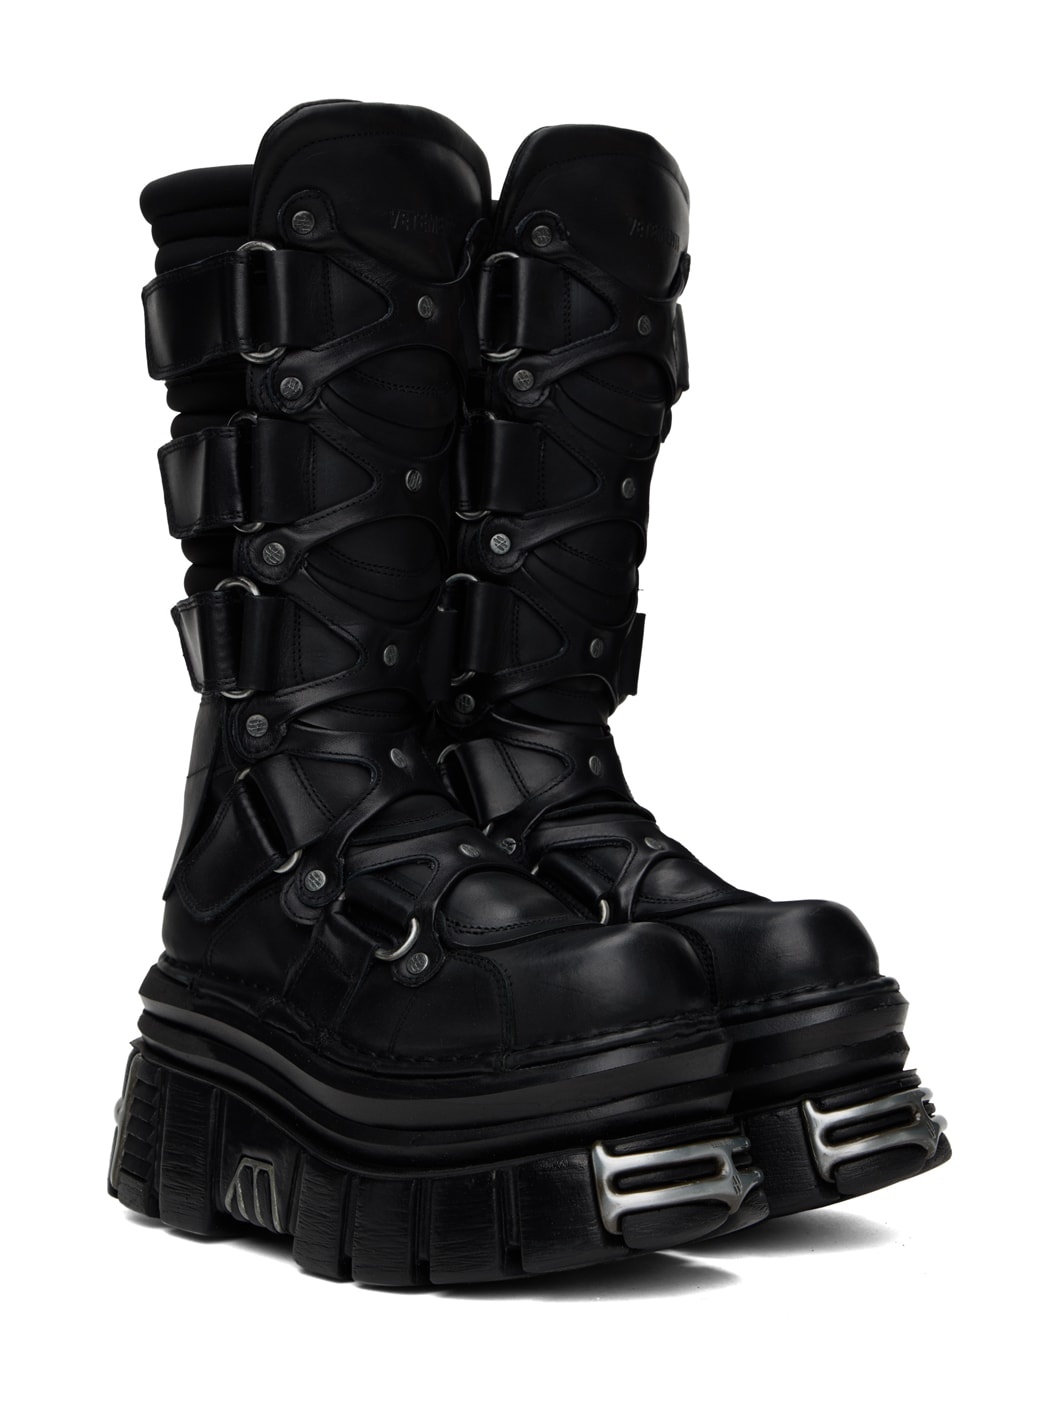 Black New Rock Edition Tower Boots - 4